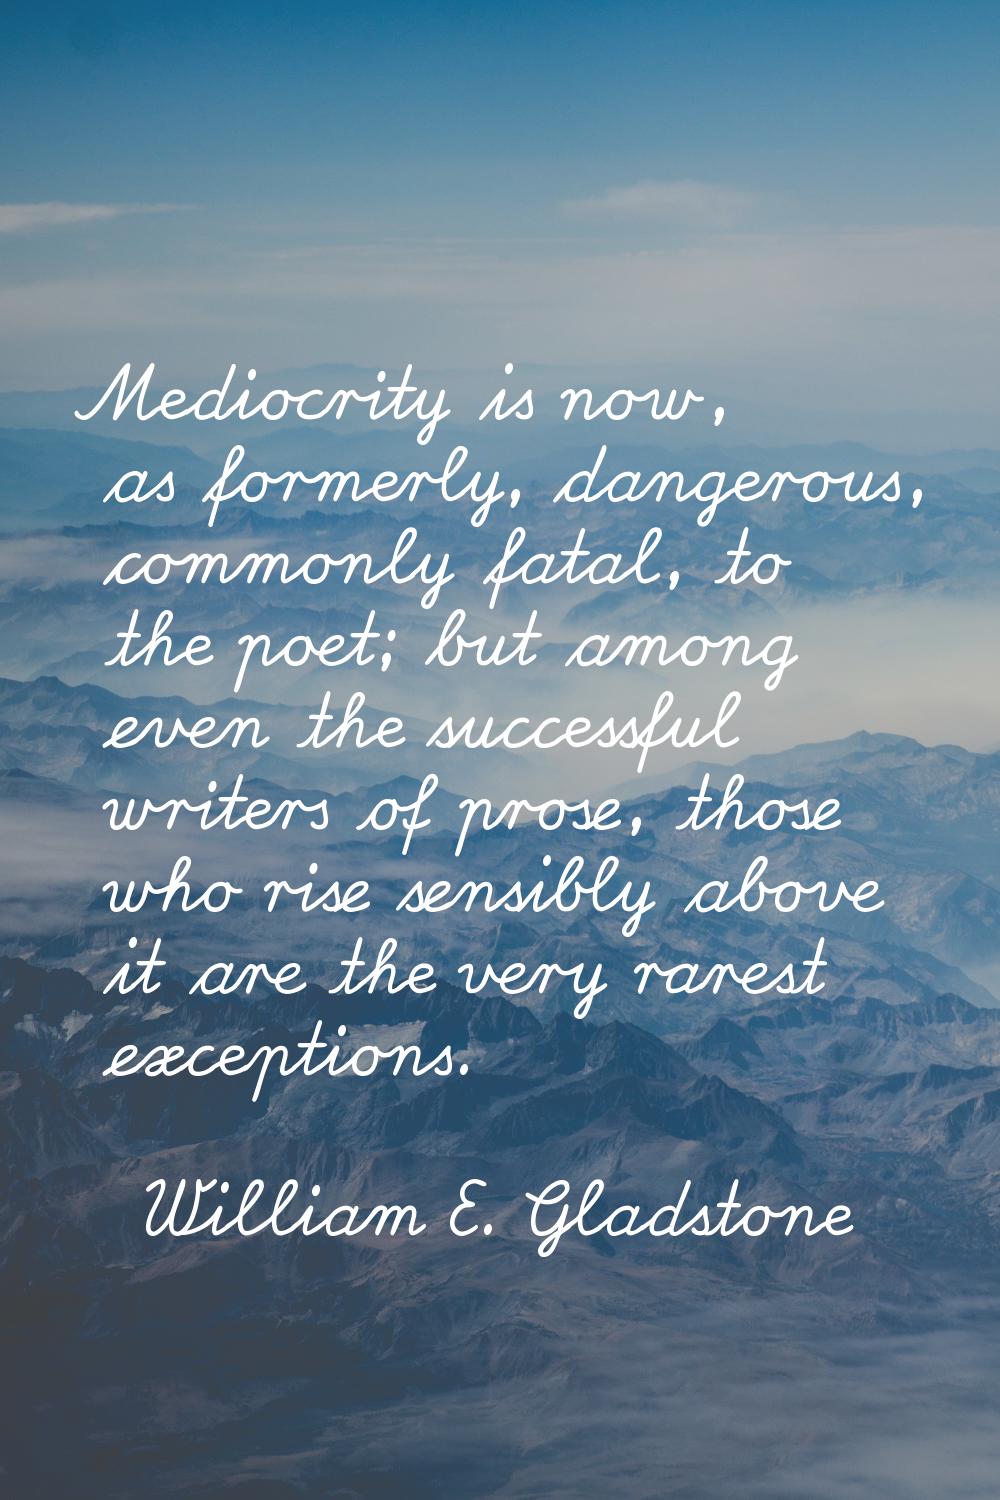 Mediocrity is now, as formerly, dangerous, commonly fatal, to the poet; but among even the successf